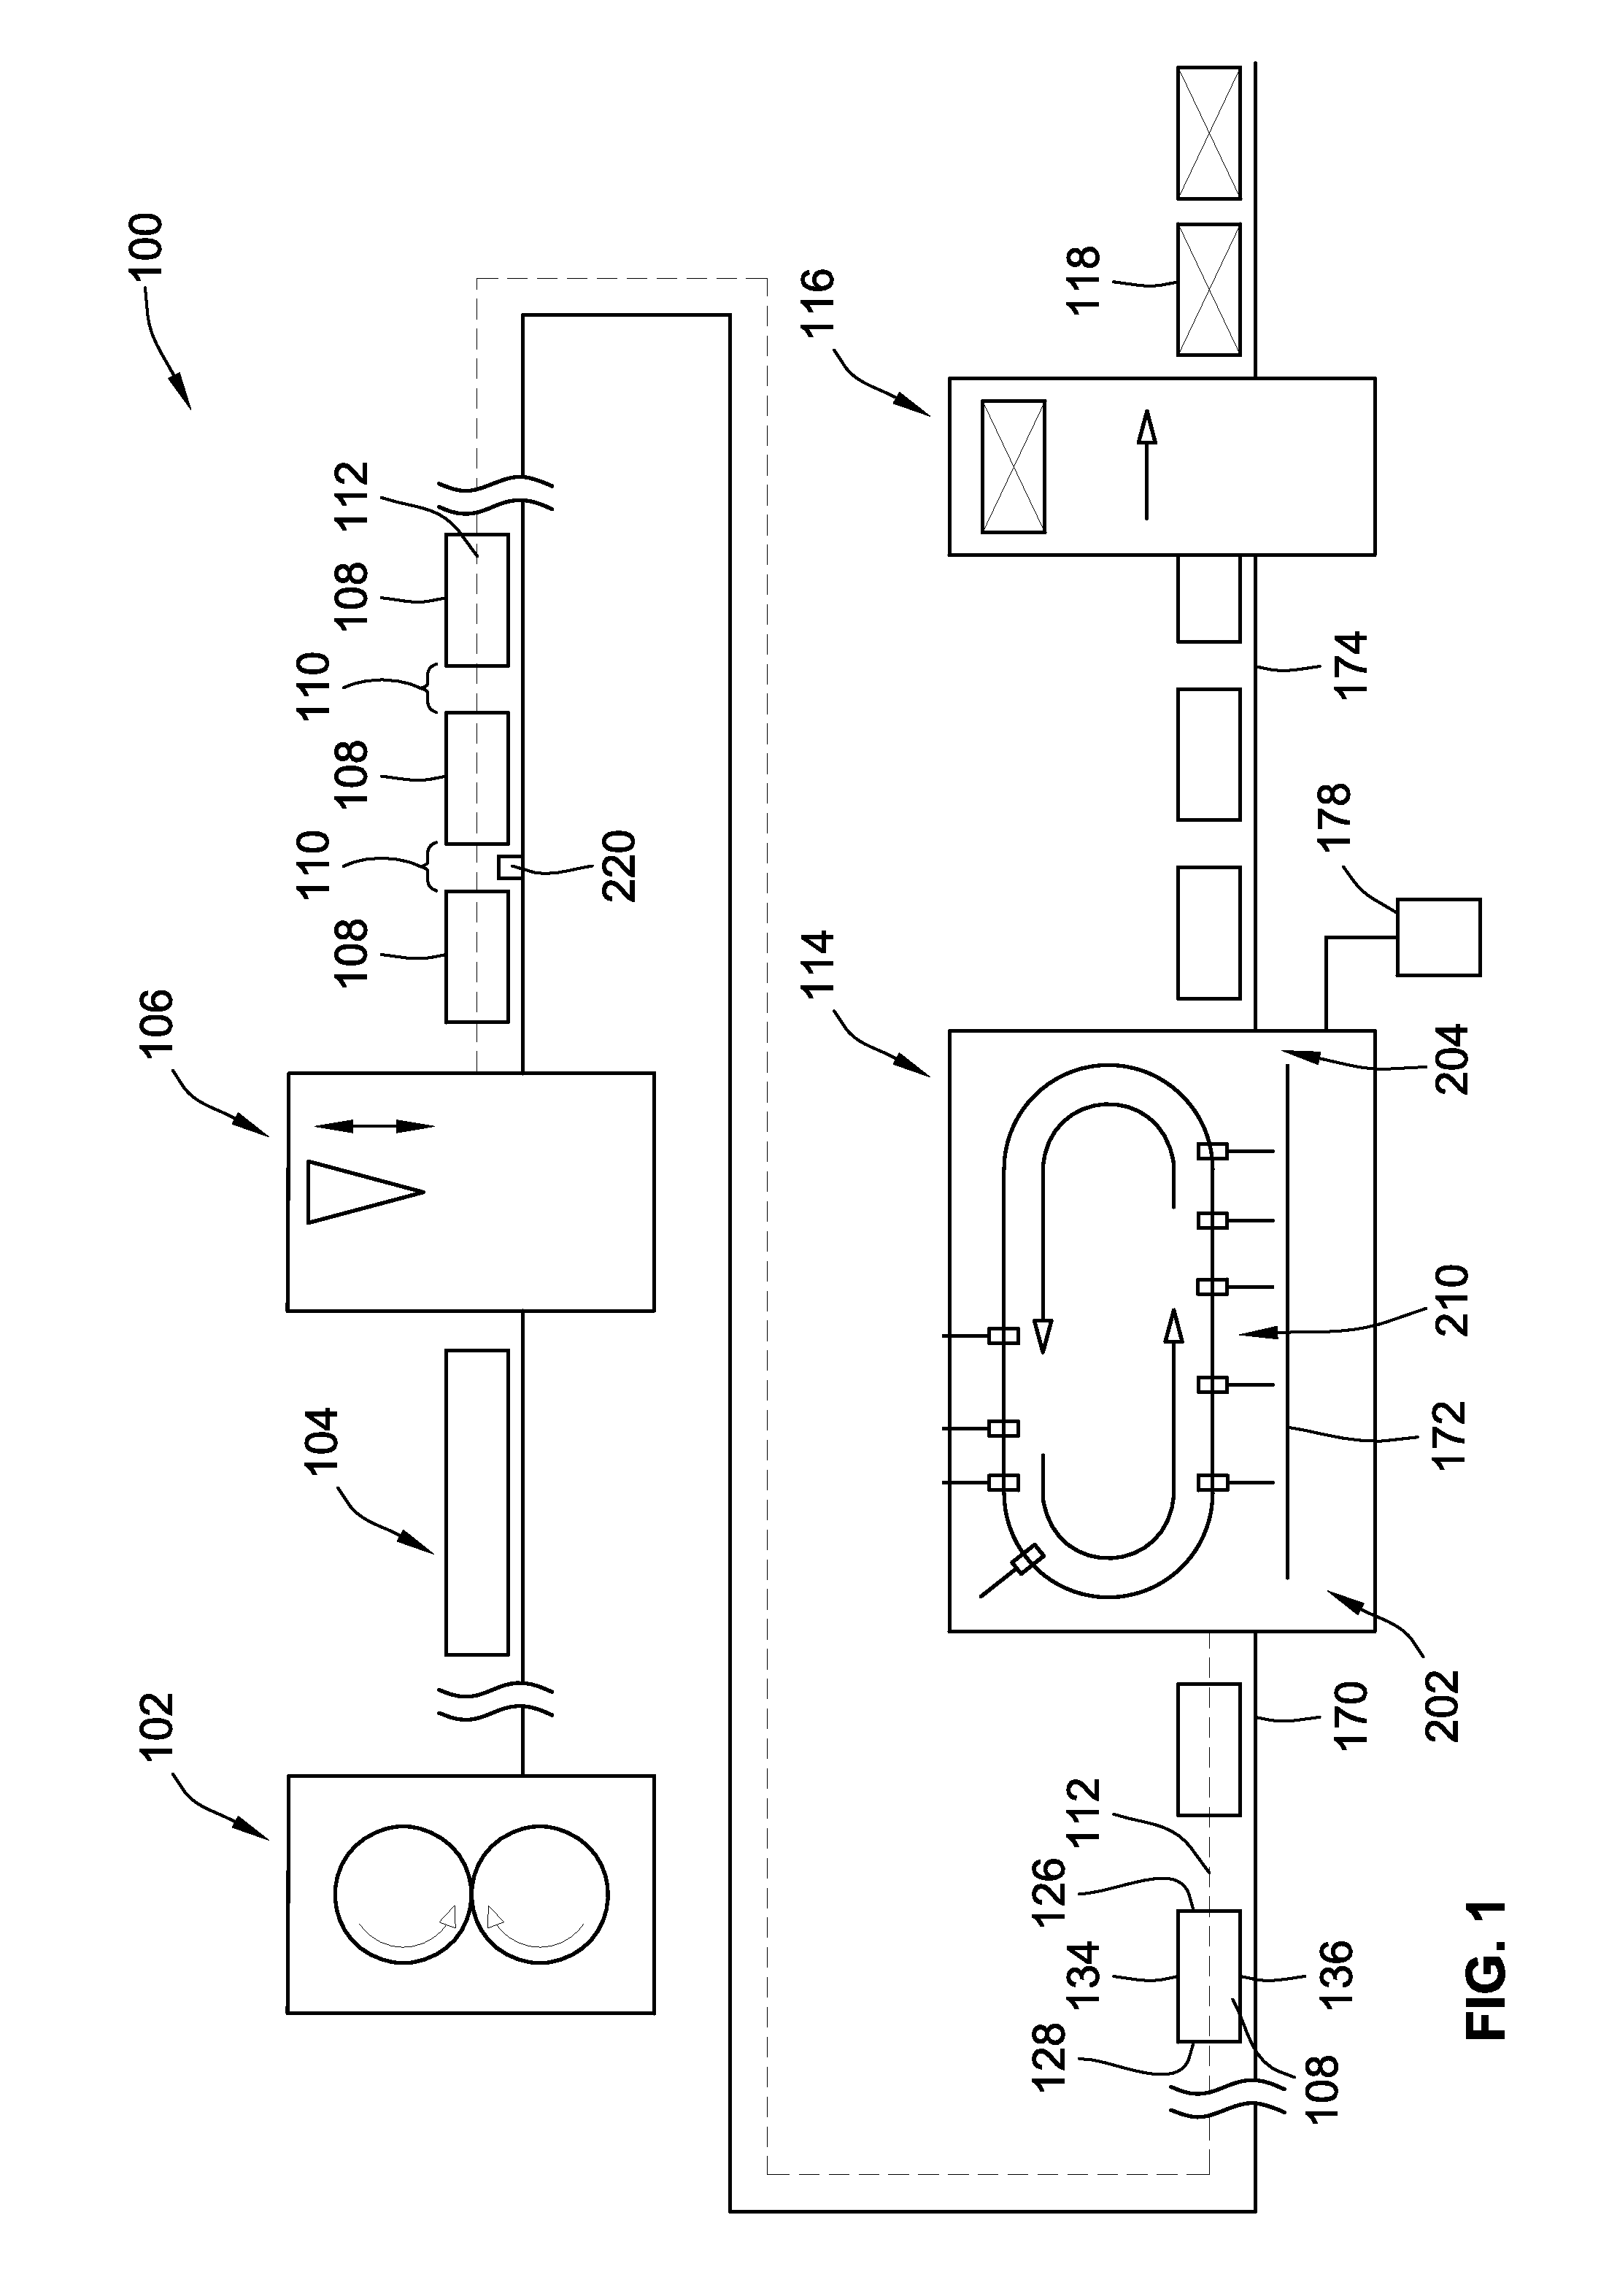 Pack alignment apparatus and methods using linear motor